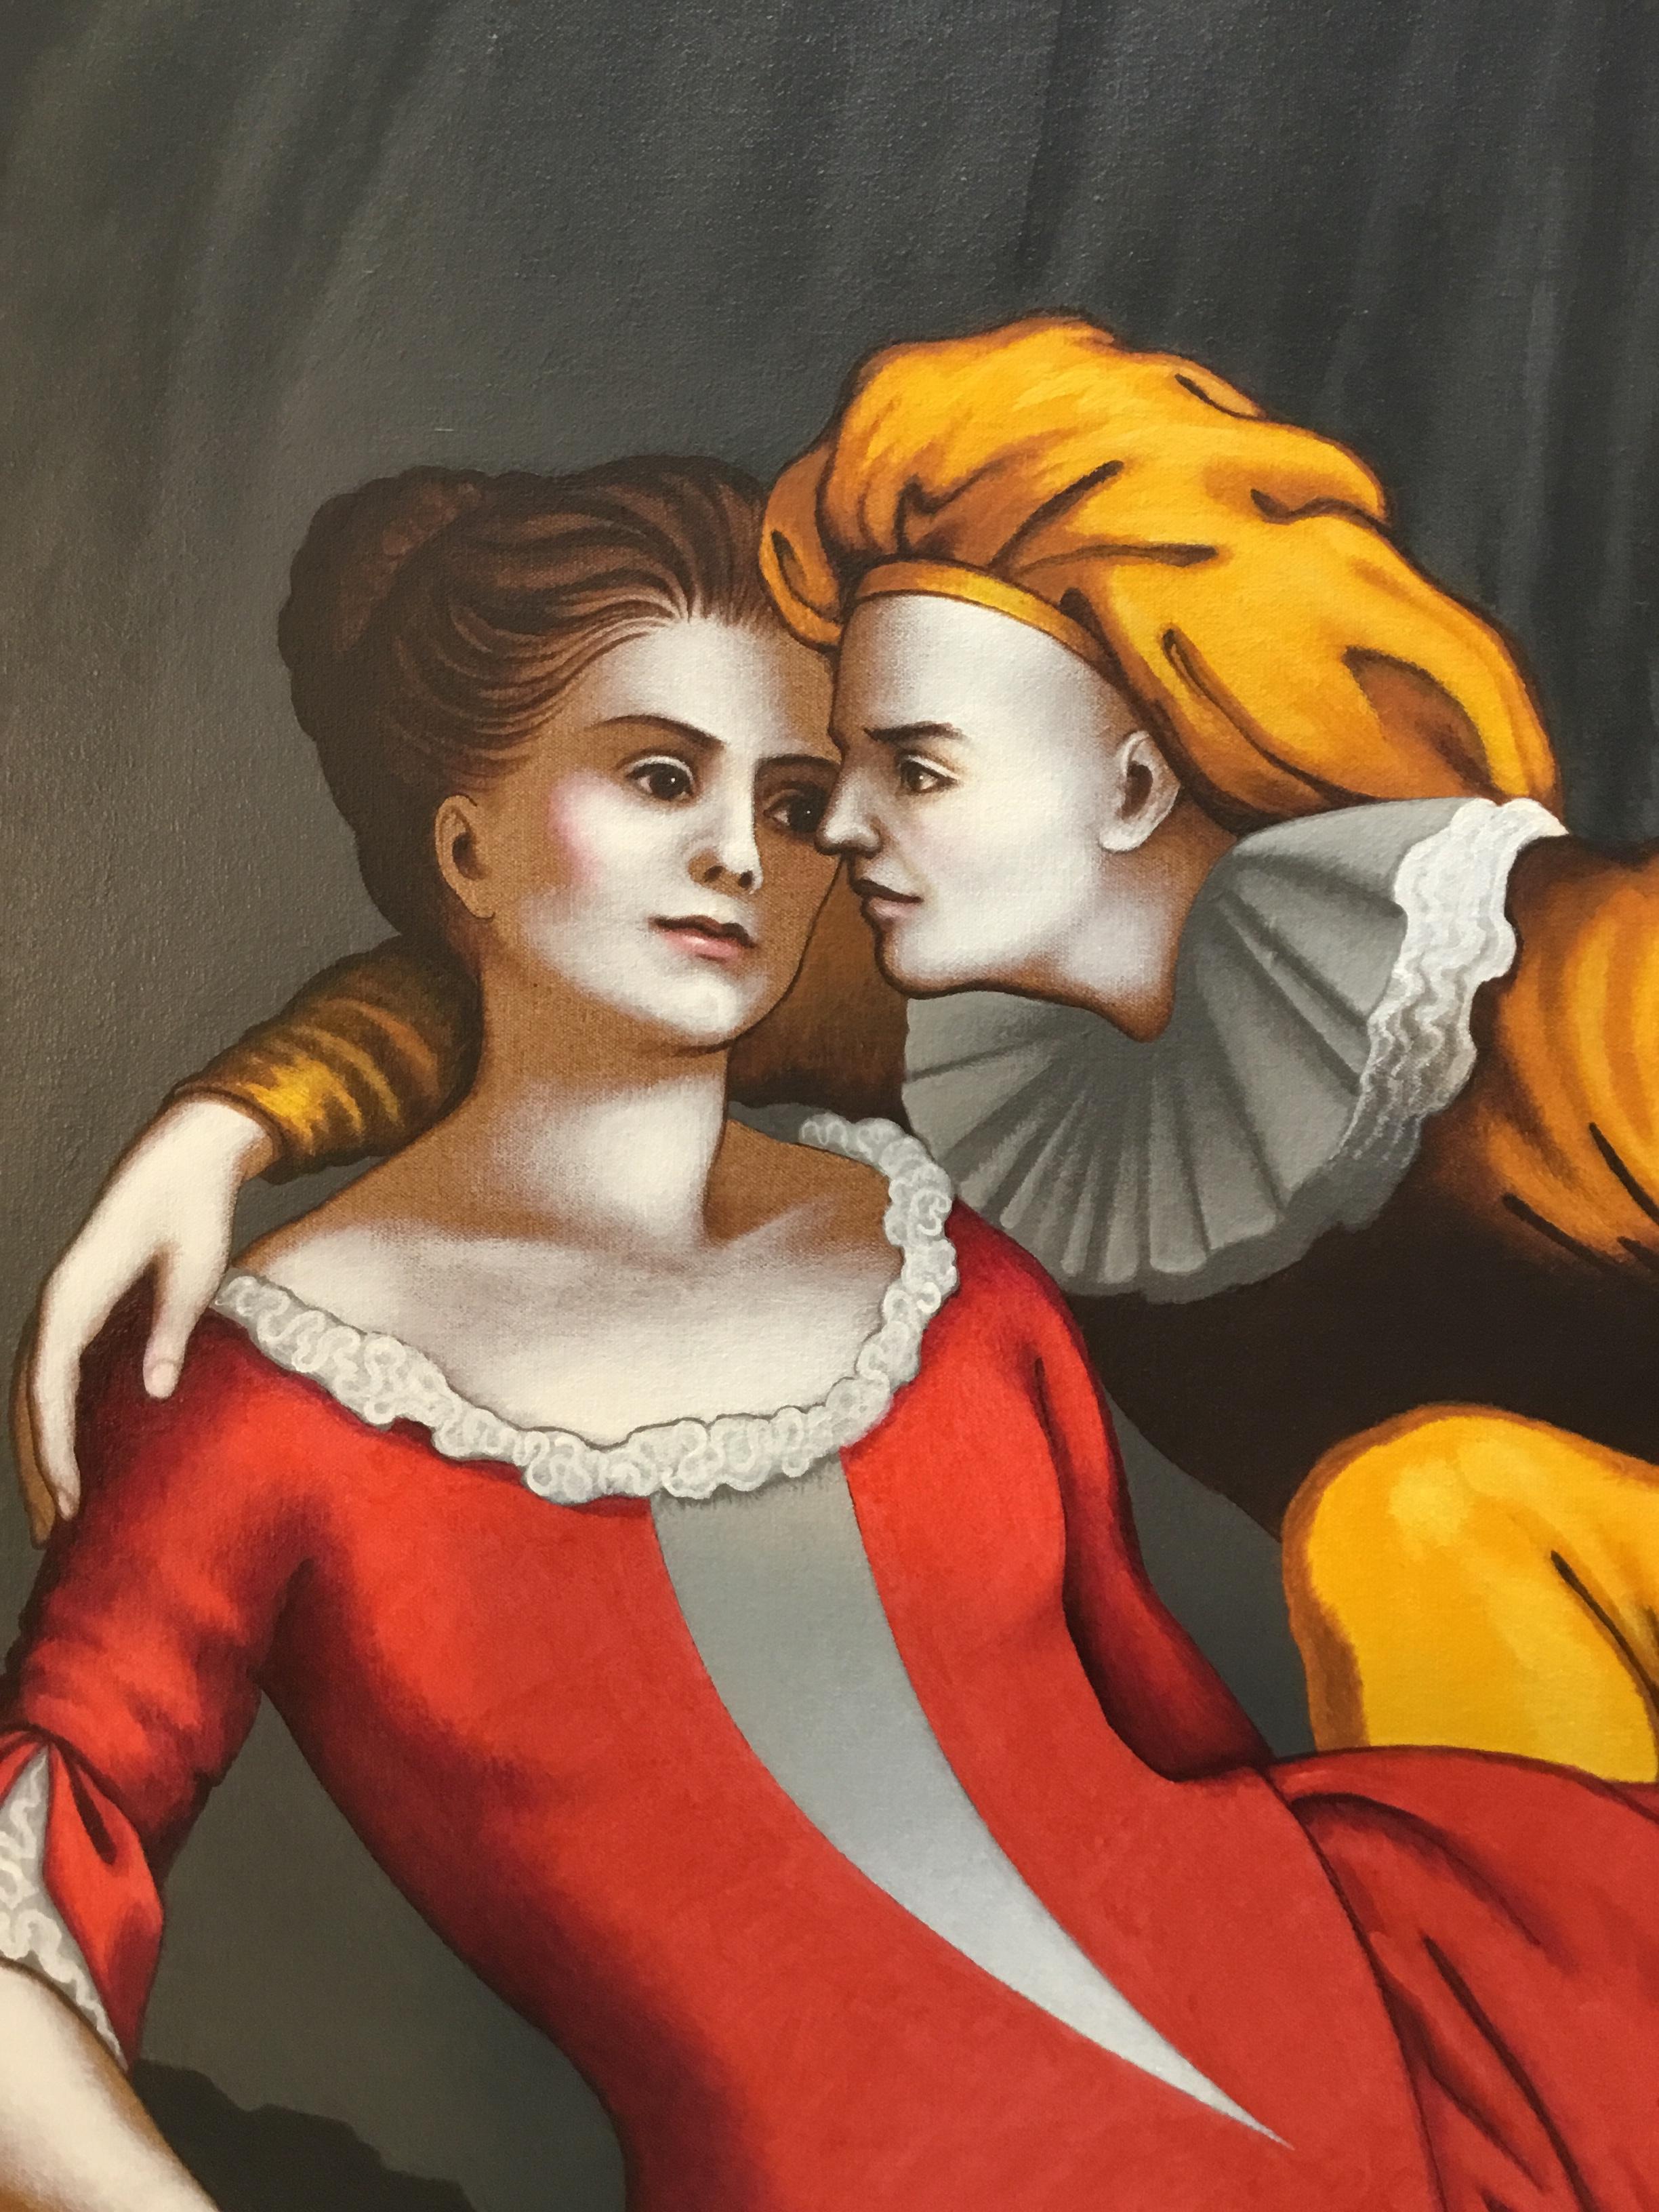 Liaisons V
Original painting by Lynn Curlee
One of a series of eight paintings based upon 17th century French engravings.
Each painting includes a man, a woman, and a dog.
Mr Curlee is a gallery painter, and author or illustrator of award